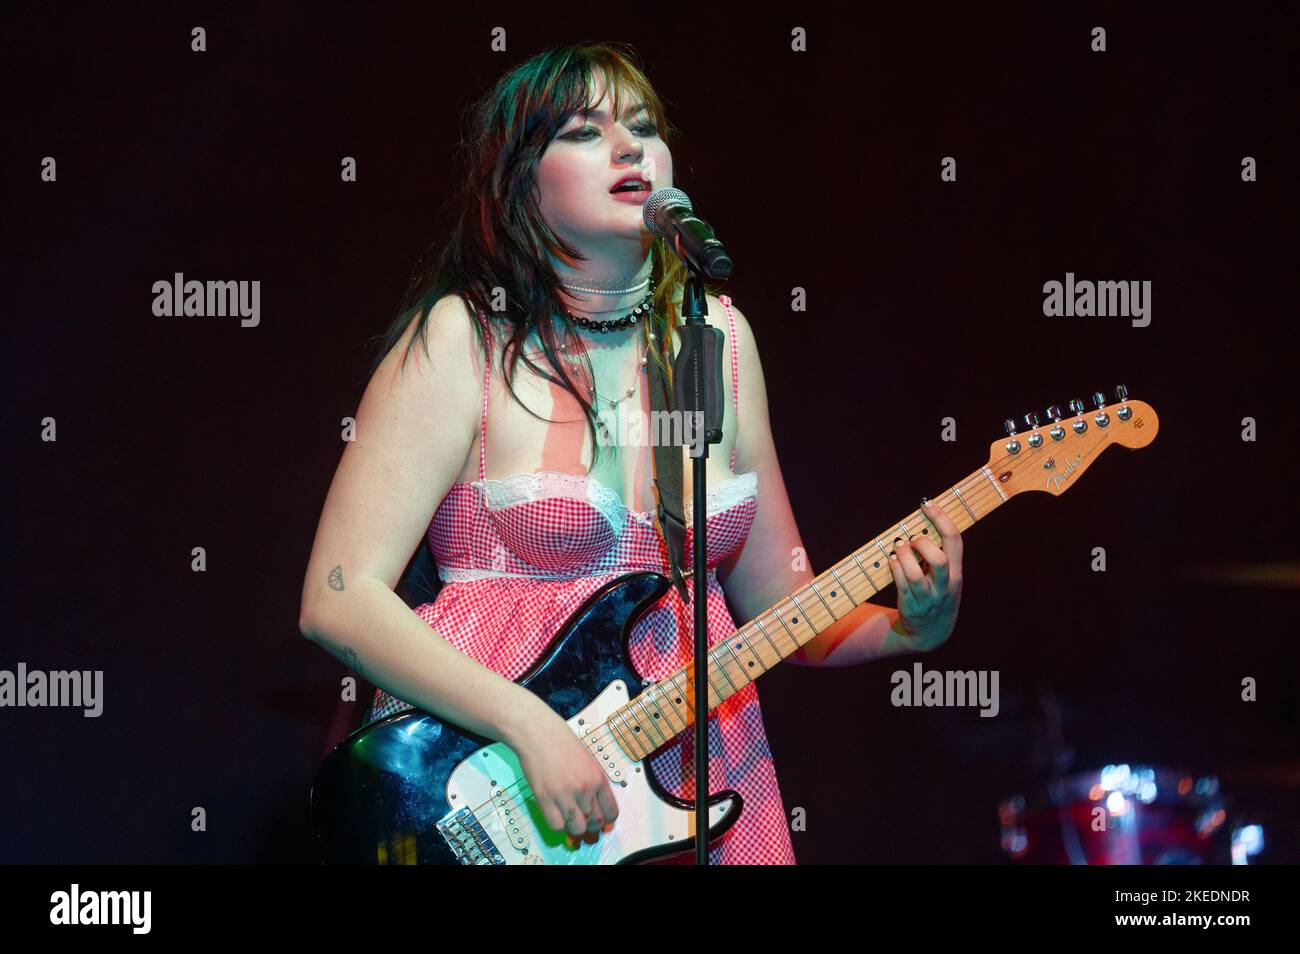 Duesseldorf, Germany. 11th Nov, 2022. Singer Gayle performs on stage at the MTV EMA Best German Act Award ceremony. Credit: Henning Kaiser/dpa/Alamy Live News Stock Photo